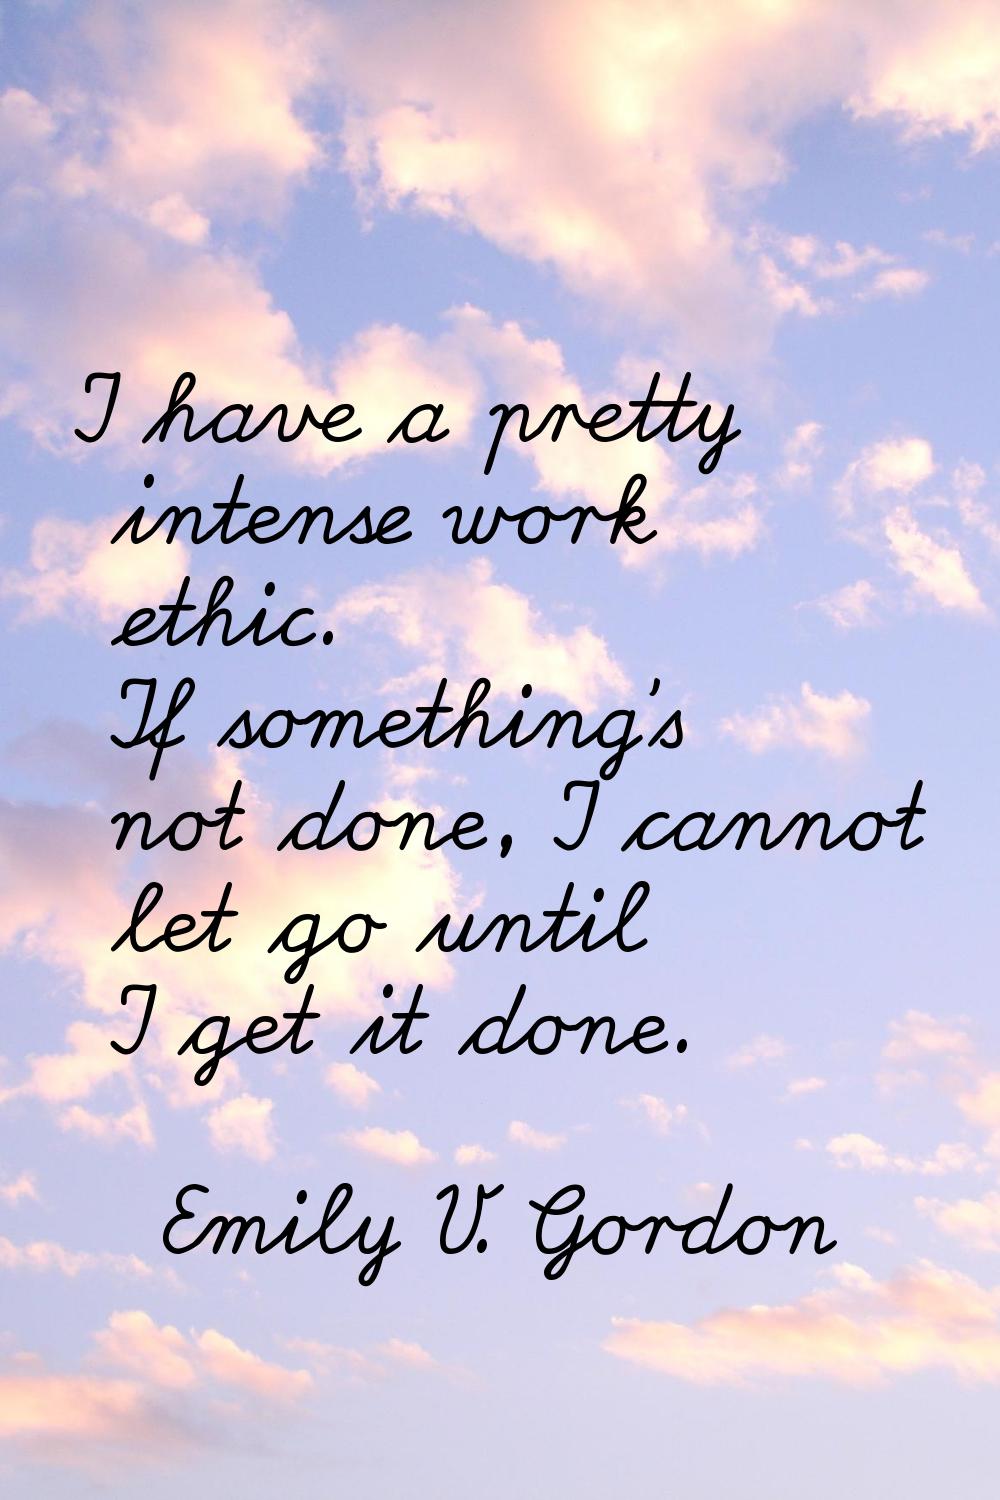 I have a pretty intense work ethic. If something's not done, I cannot let go until I get it done.